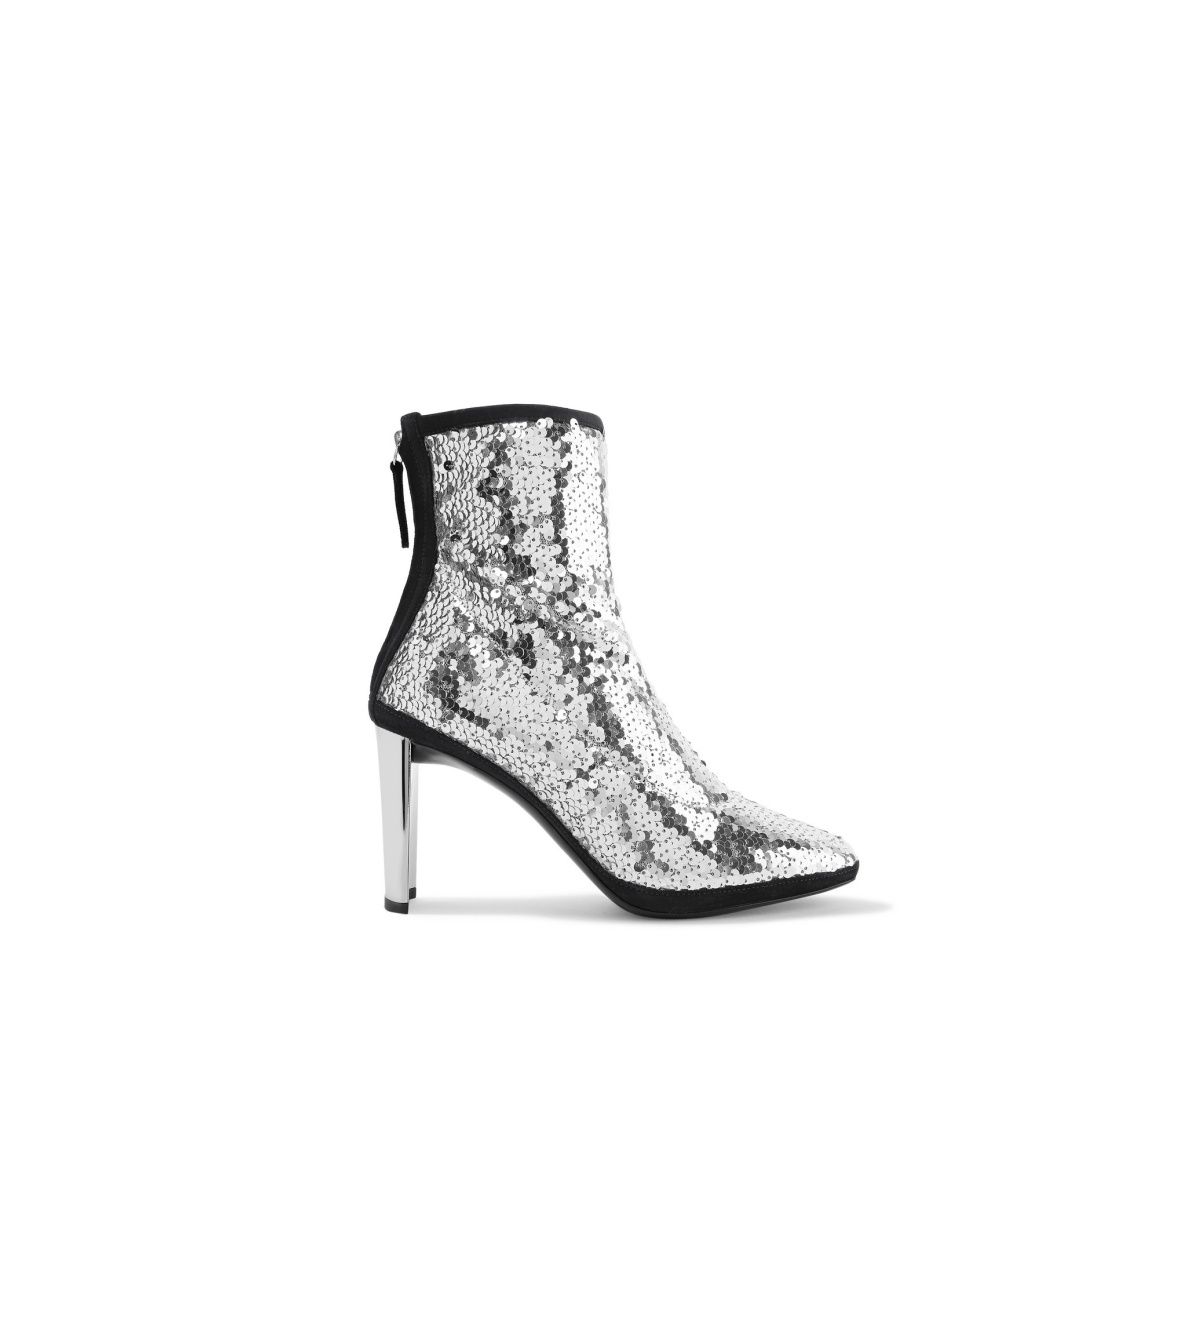 Spice up your party look with these 10 embellished heels | Lifestyle ...